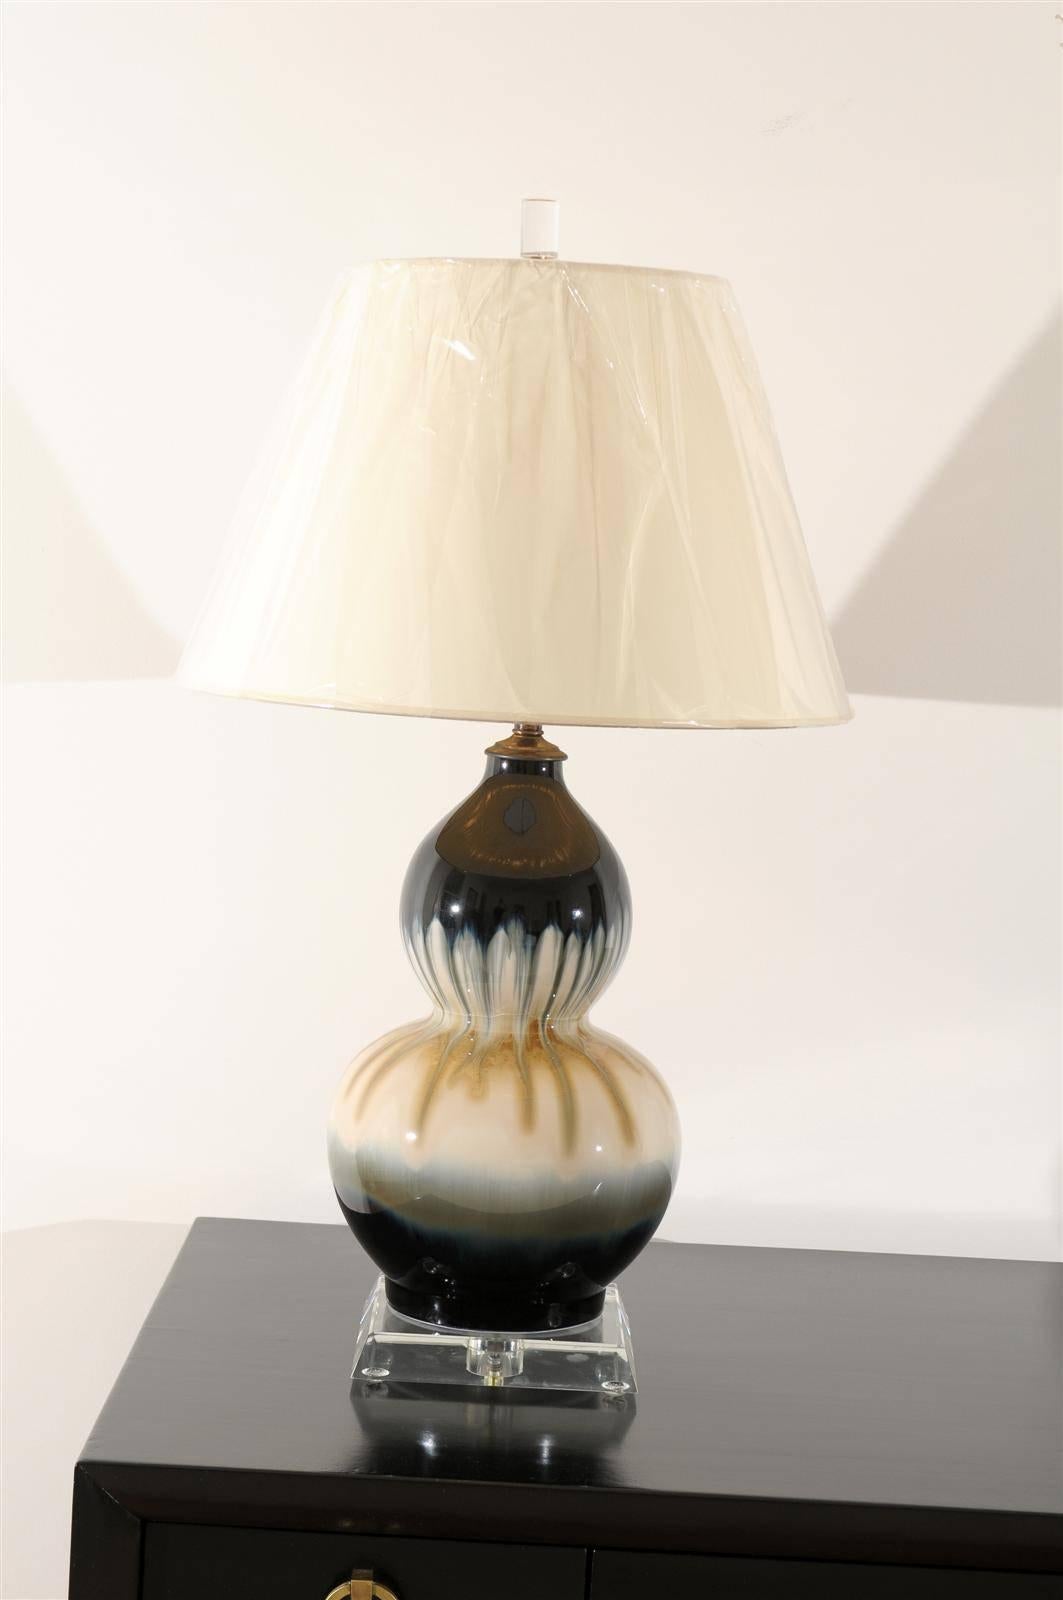 A stunning pair of vintage drip glaze ceramic double gourd lamps, circa 1980s. Exceptional range of color and finish. Sublime jewelry for any room. Excellent restored condition. The lamps have been rewired using clear cord, new three-way sockets